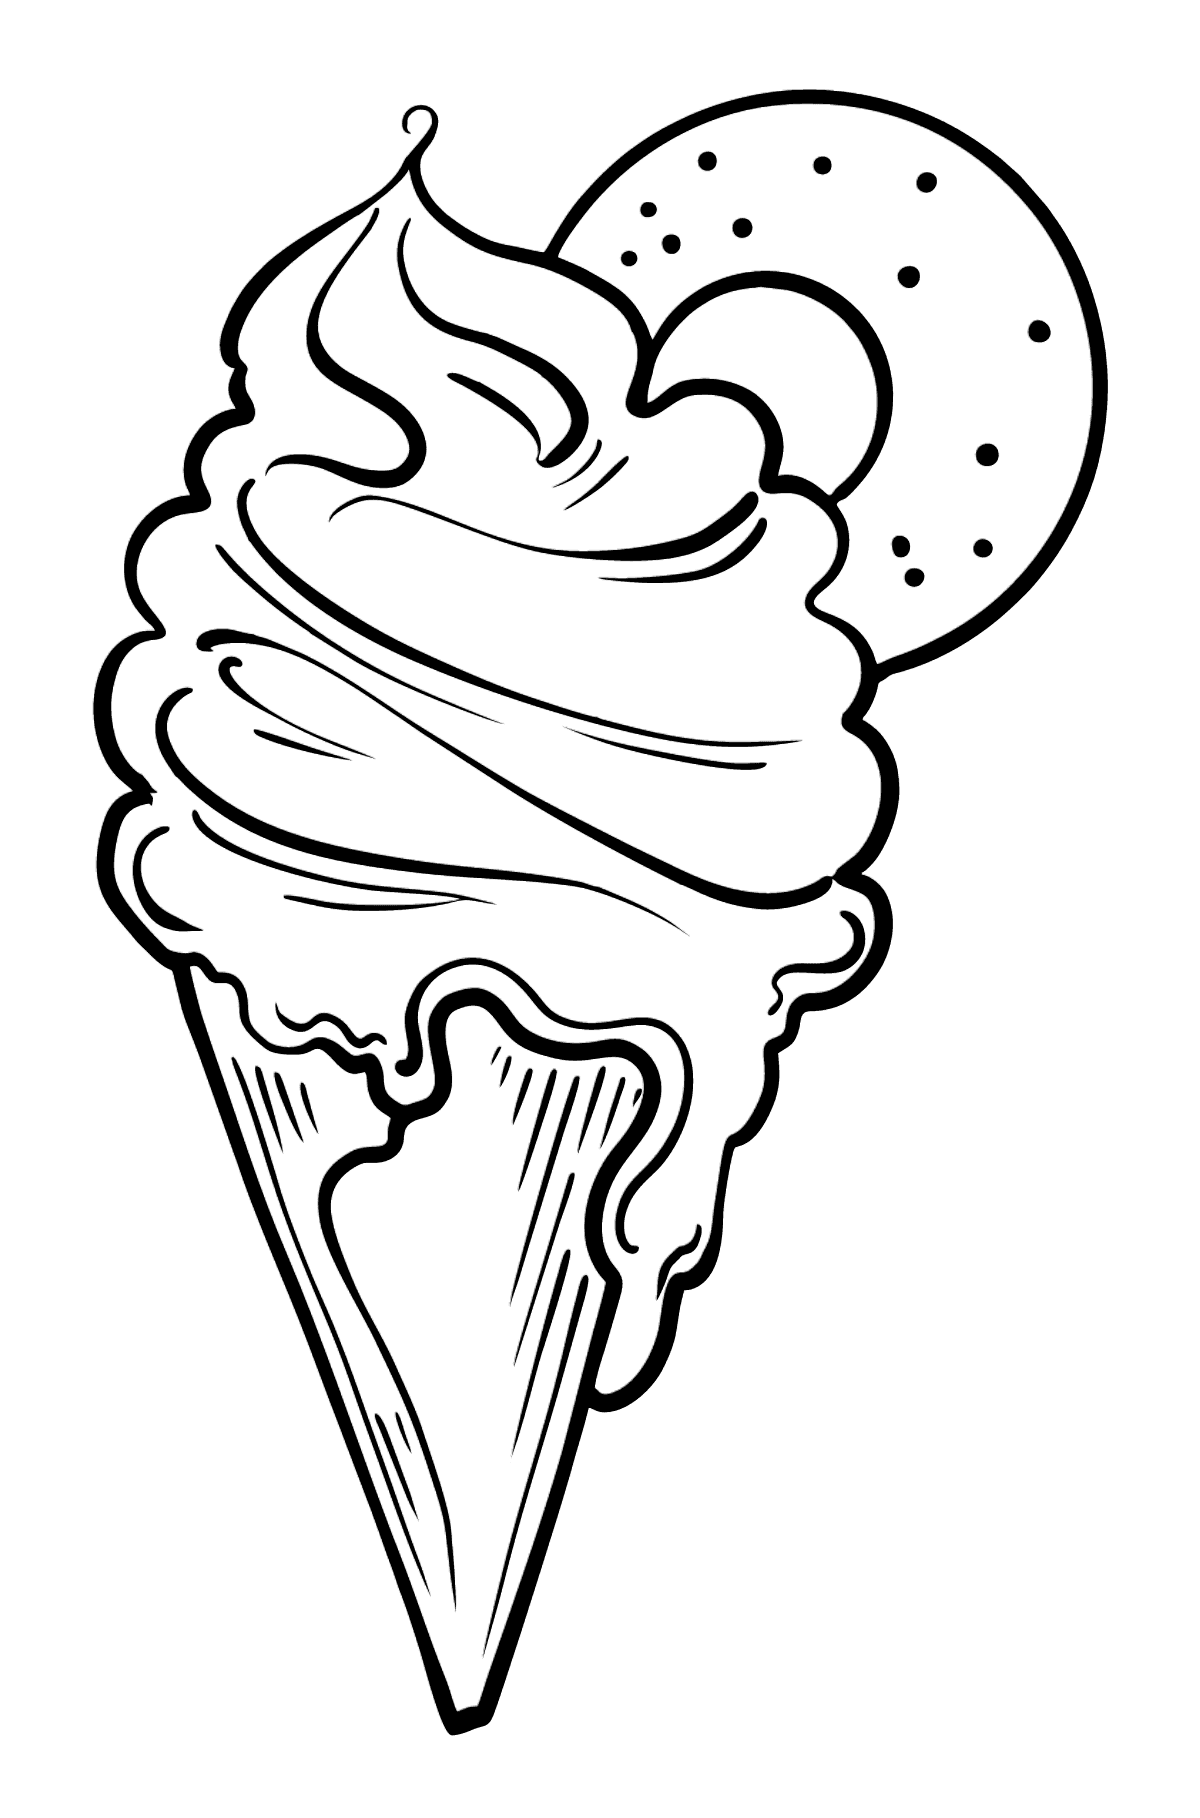 Ice Cream Cone and Pink Lollipop coloring page - Coloring Pages for Kids